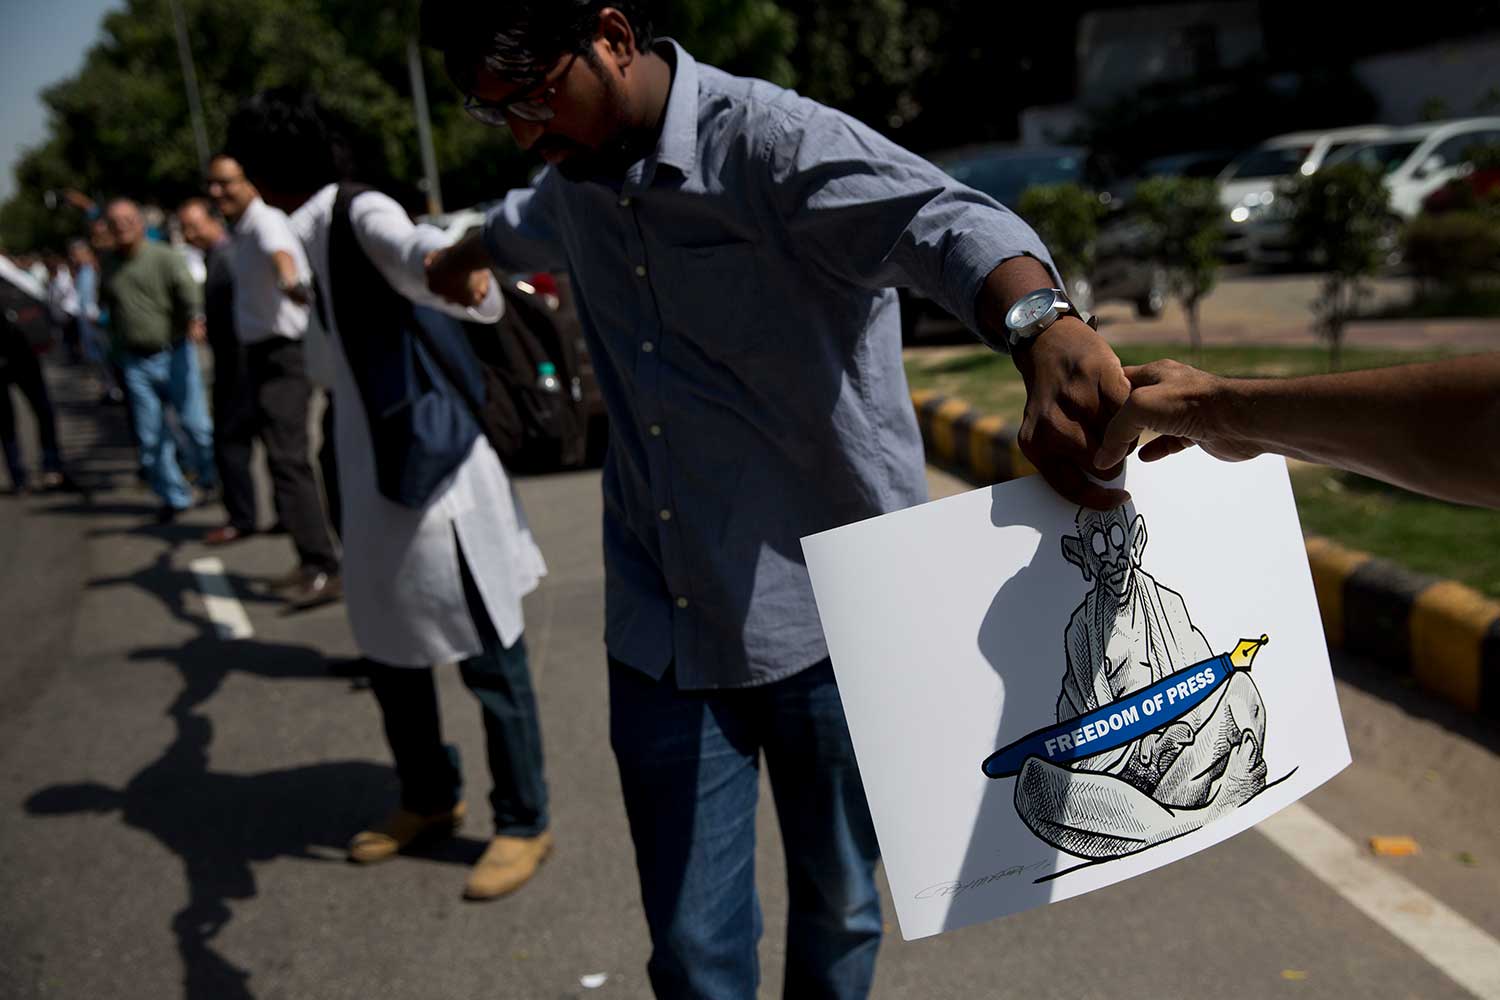 Indian journalists form a human chain near the Press Club of India to protest the killing of journalists in New Delhi on October 2, 2017. All murders of journalists in India have been carried out with complete impunity. (AP/Tsering Topgyal)